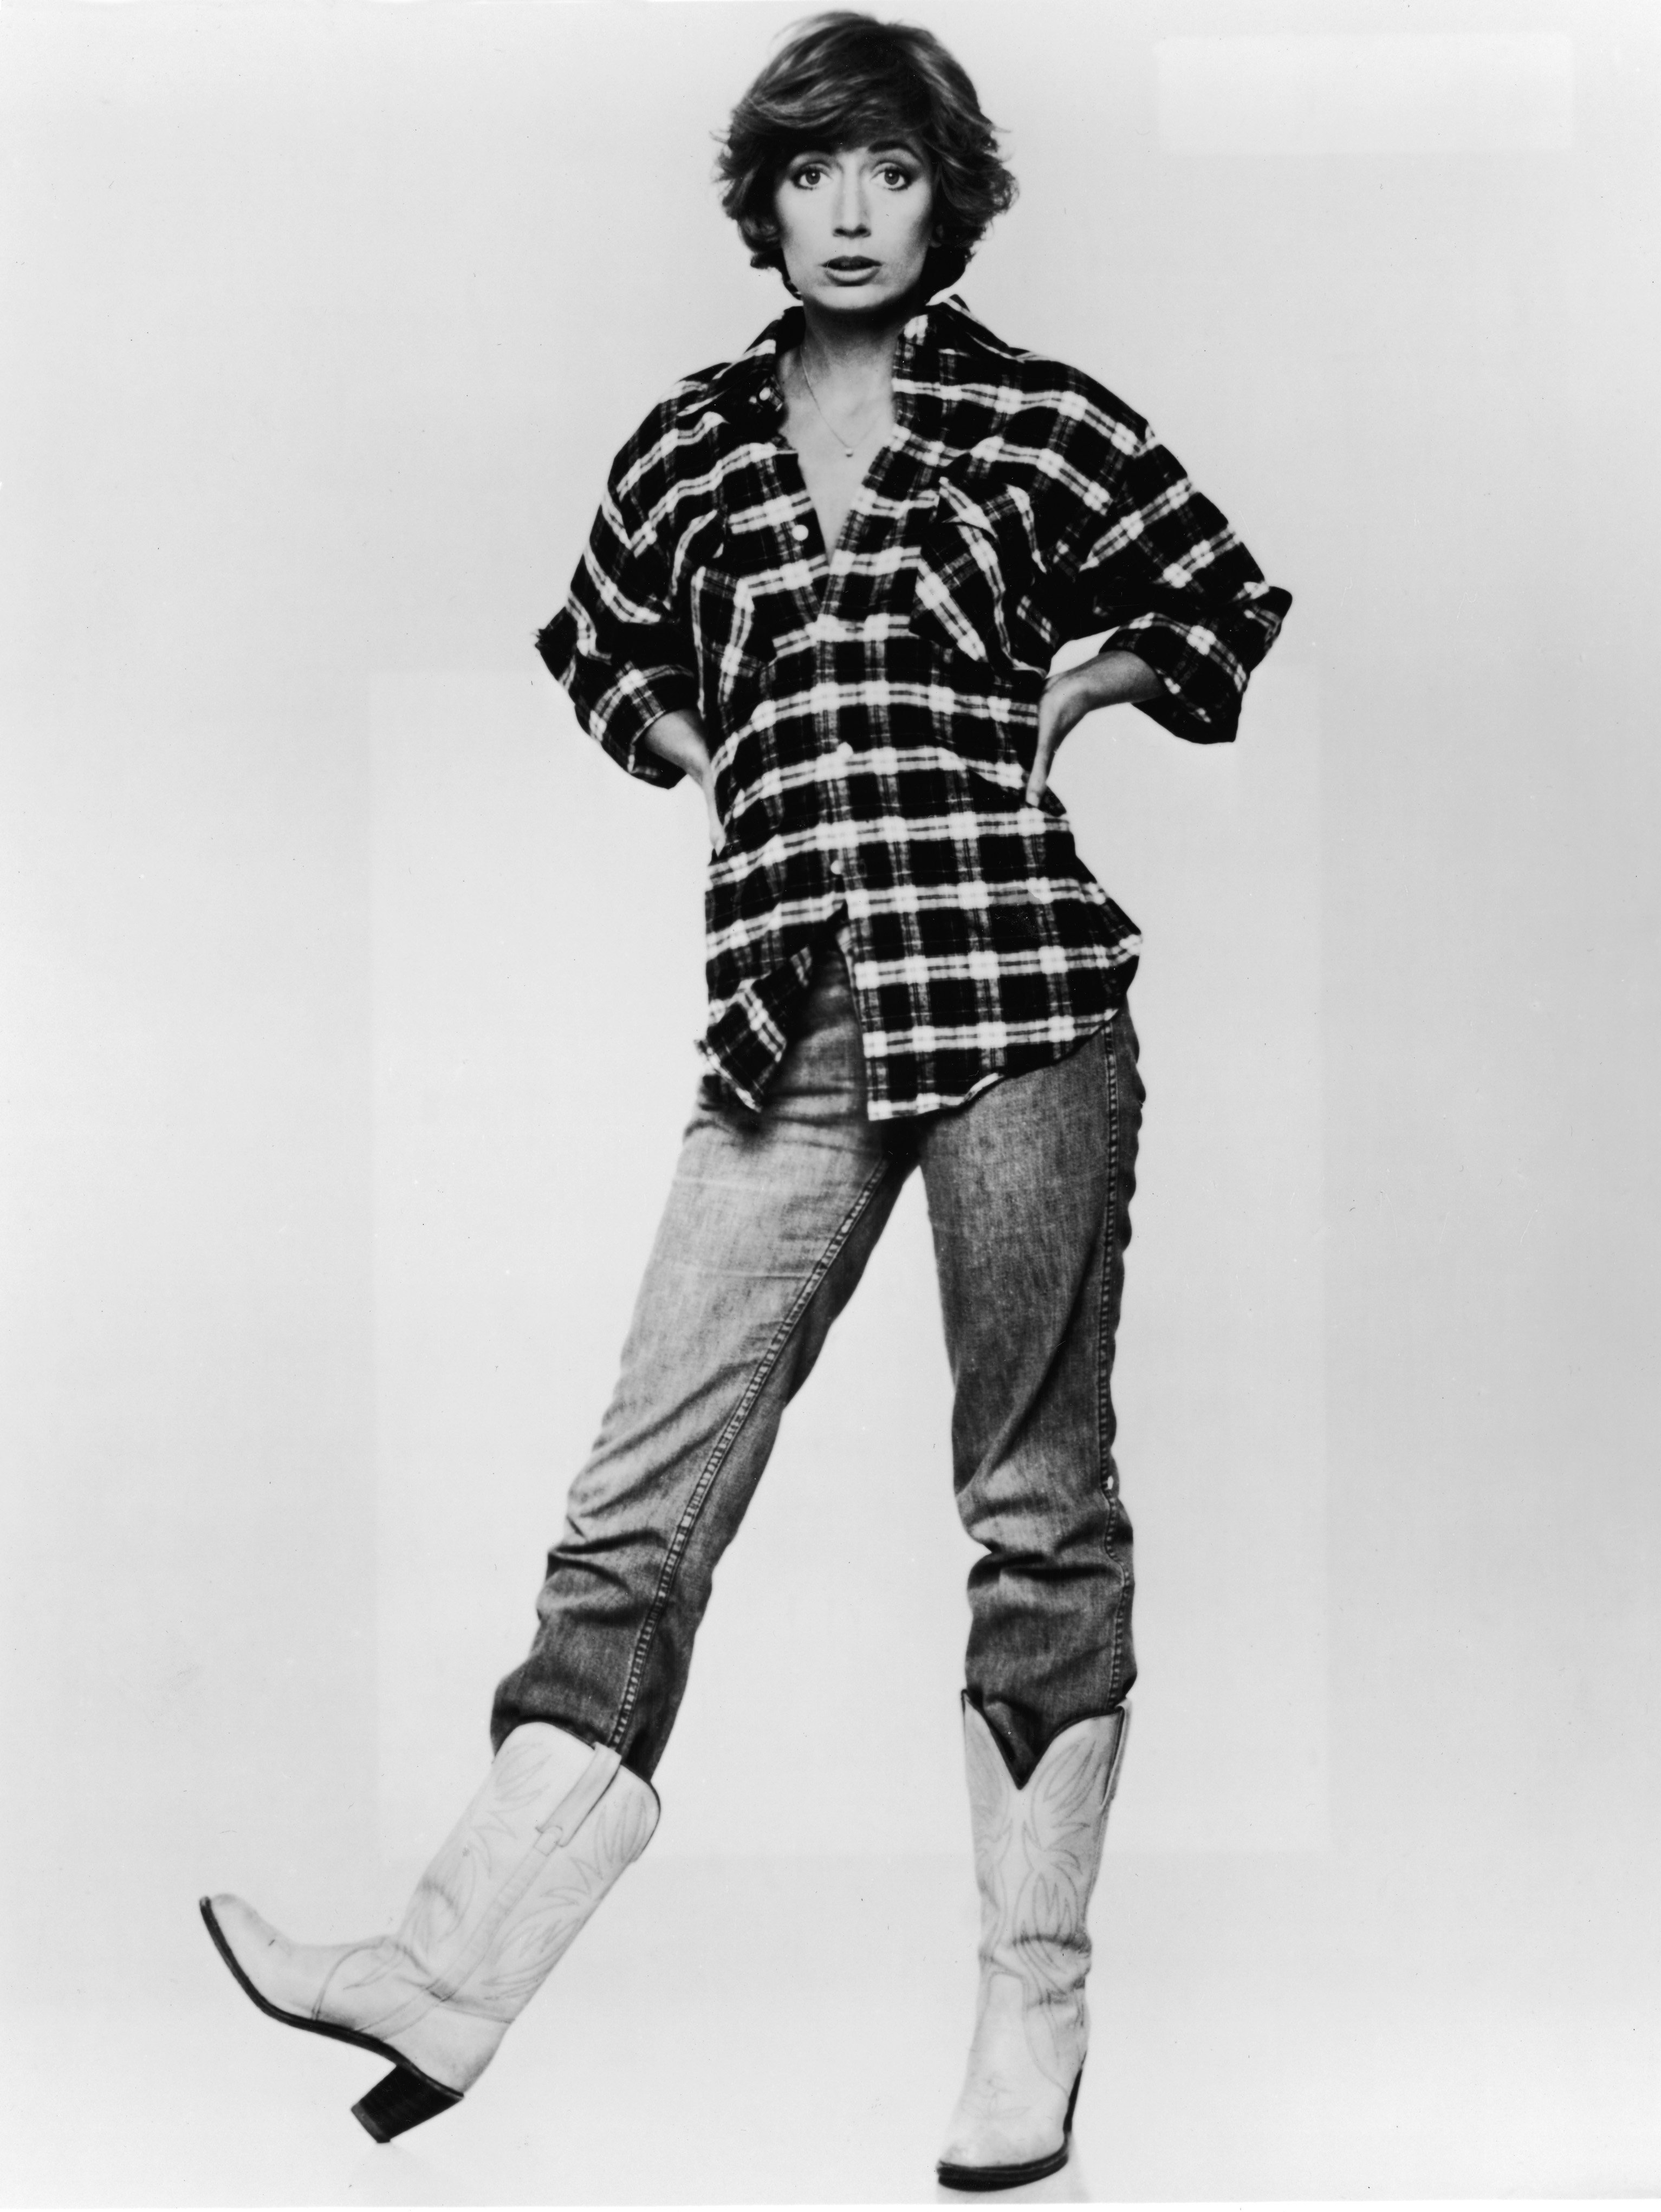 Full-length promotional studio portrait of American actor Penny Marshall wearing cowboy boots, 1970s | Source: Getty Images